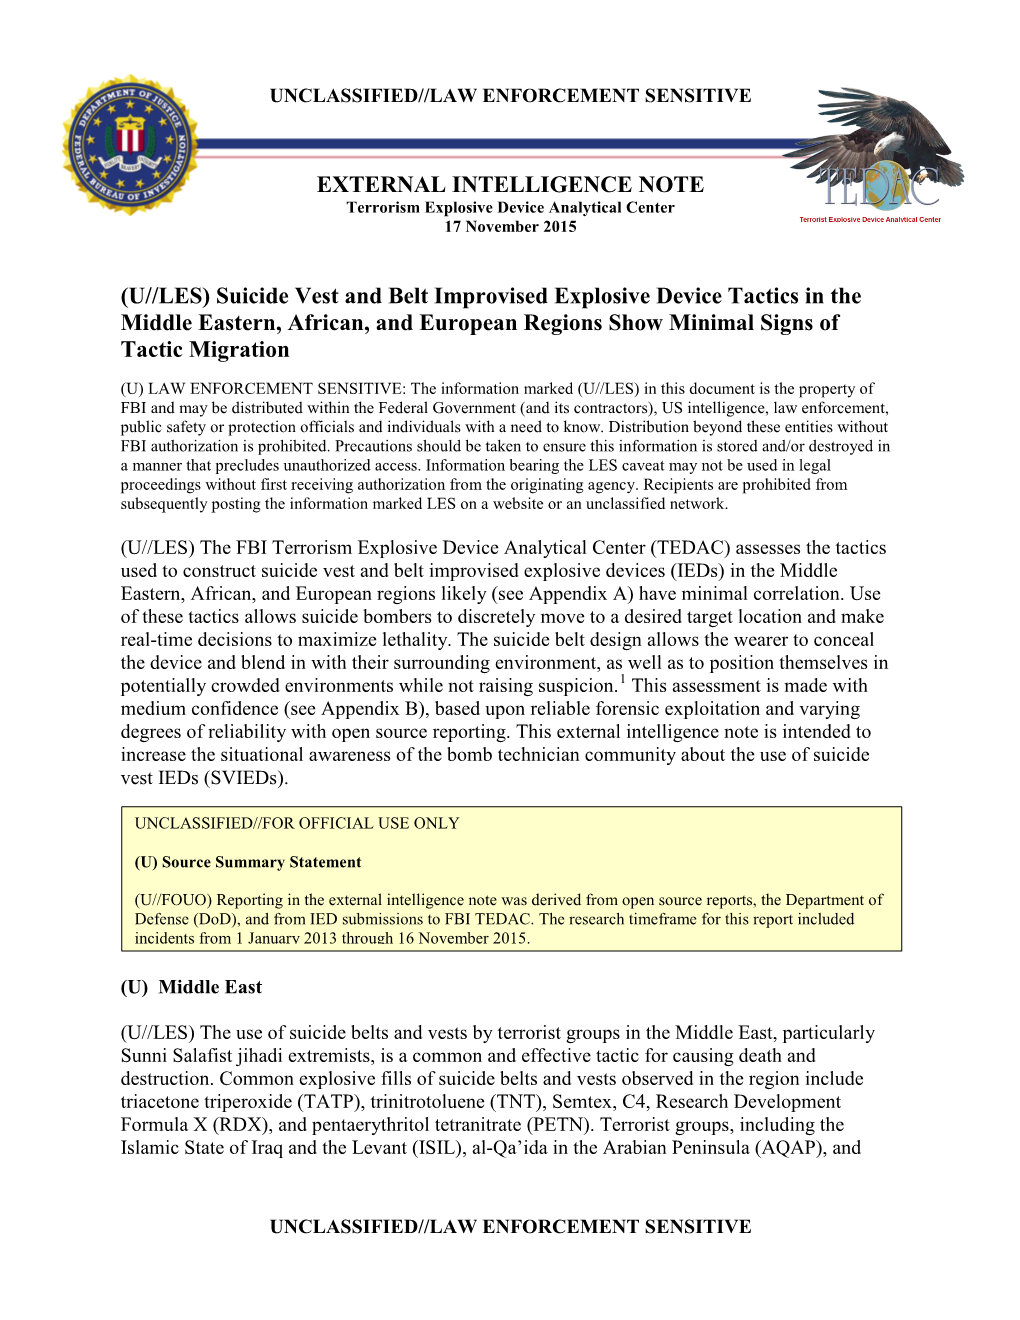 EXTERNAL INTELLIGENCE NOTE (U//LES) Suicide Vest and Belt Improvised Explosive Device Tactics in the Middle Eastern, African, An